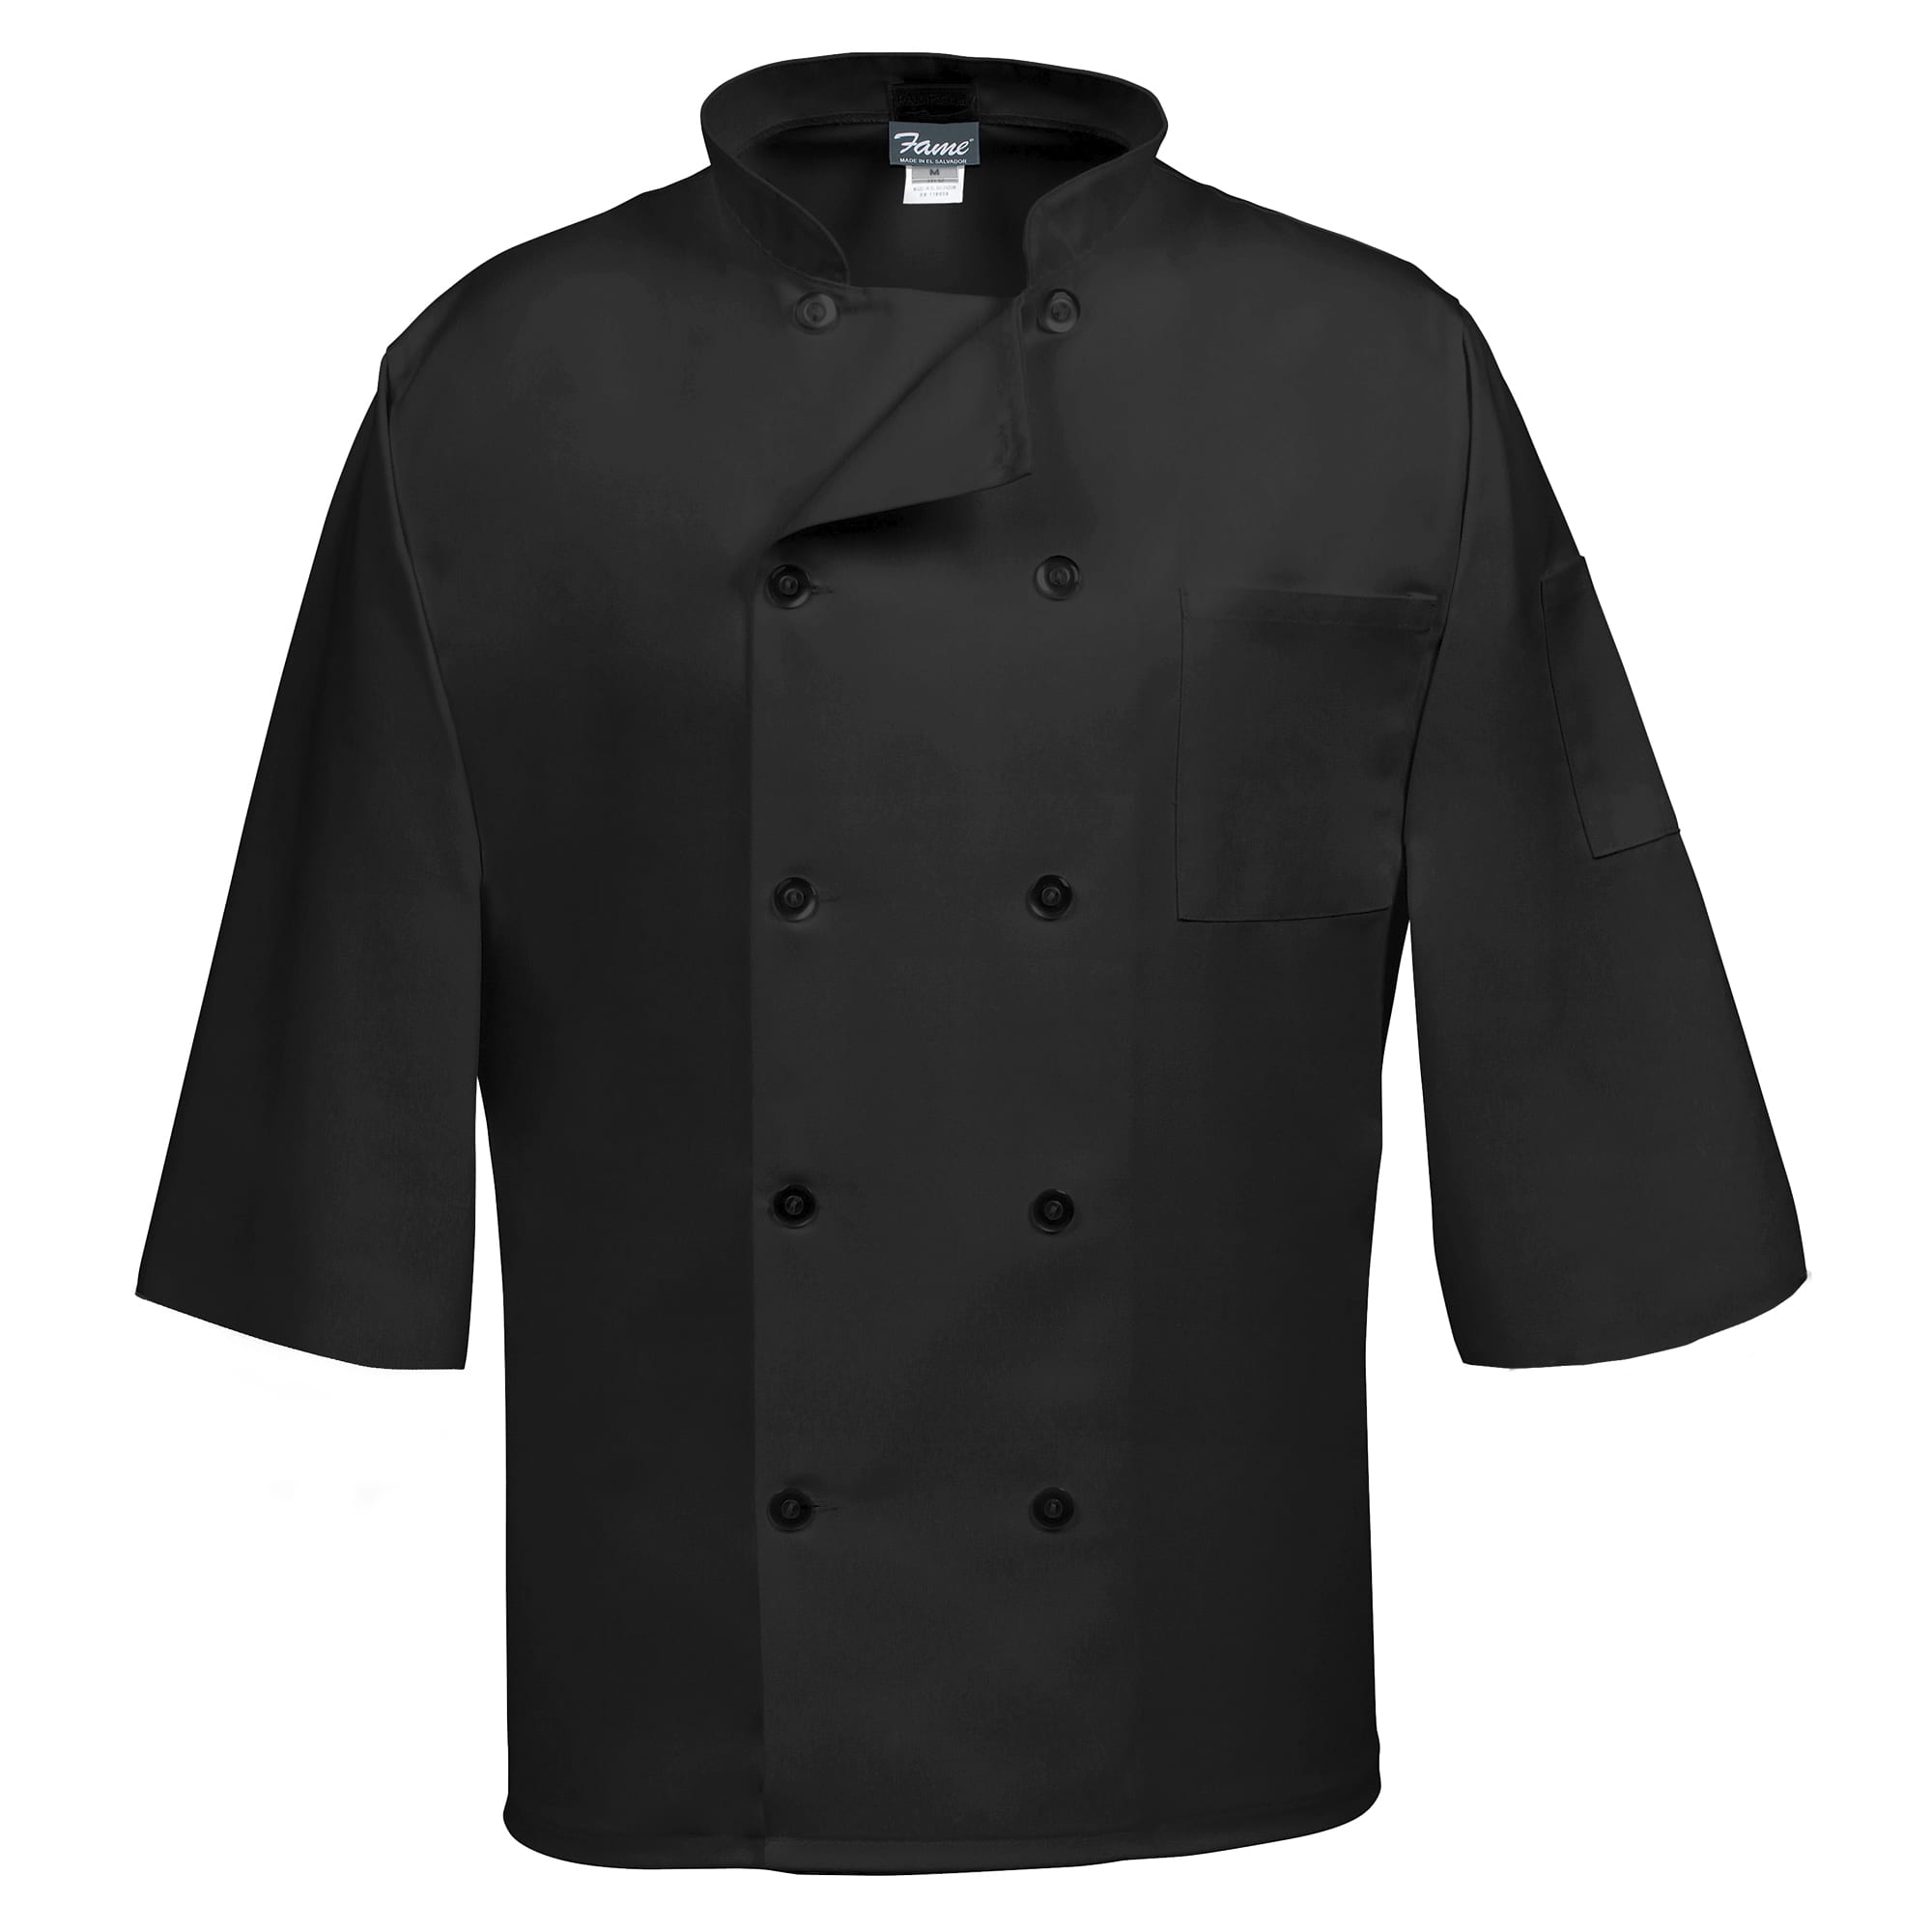 Unisex Long Sleeve Buttons Hotel Restaurant Chef Coat Jacket SI